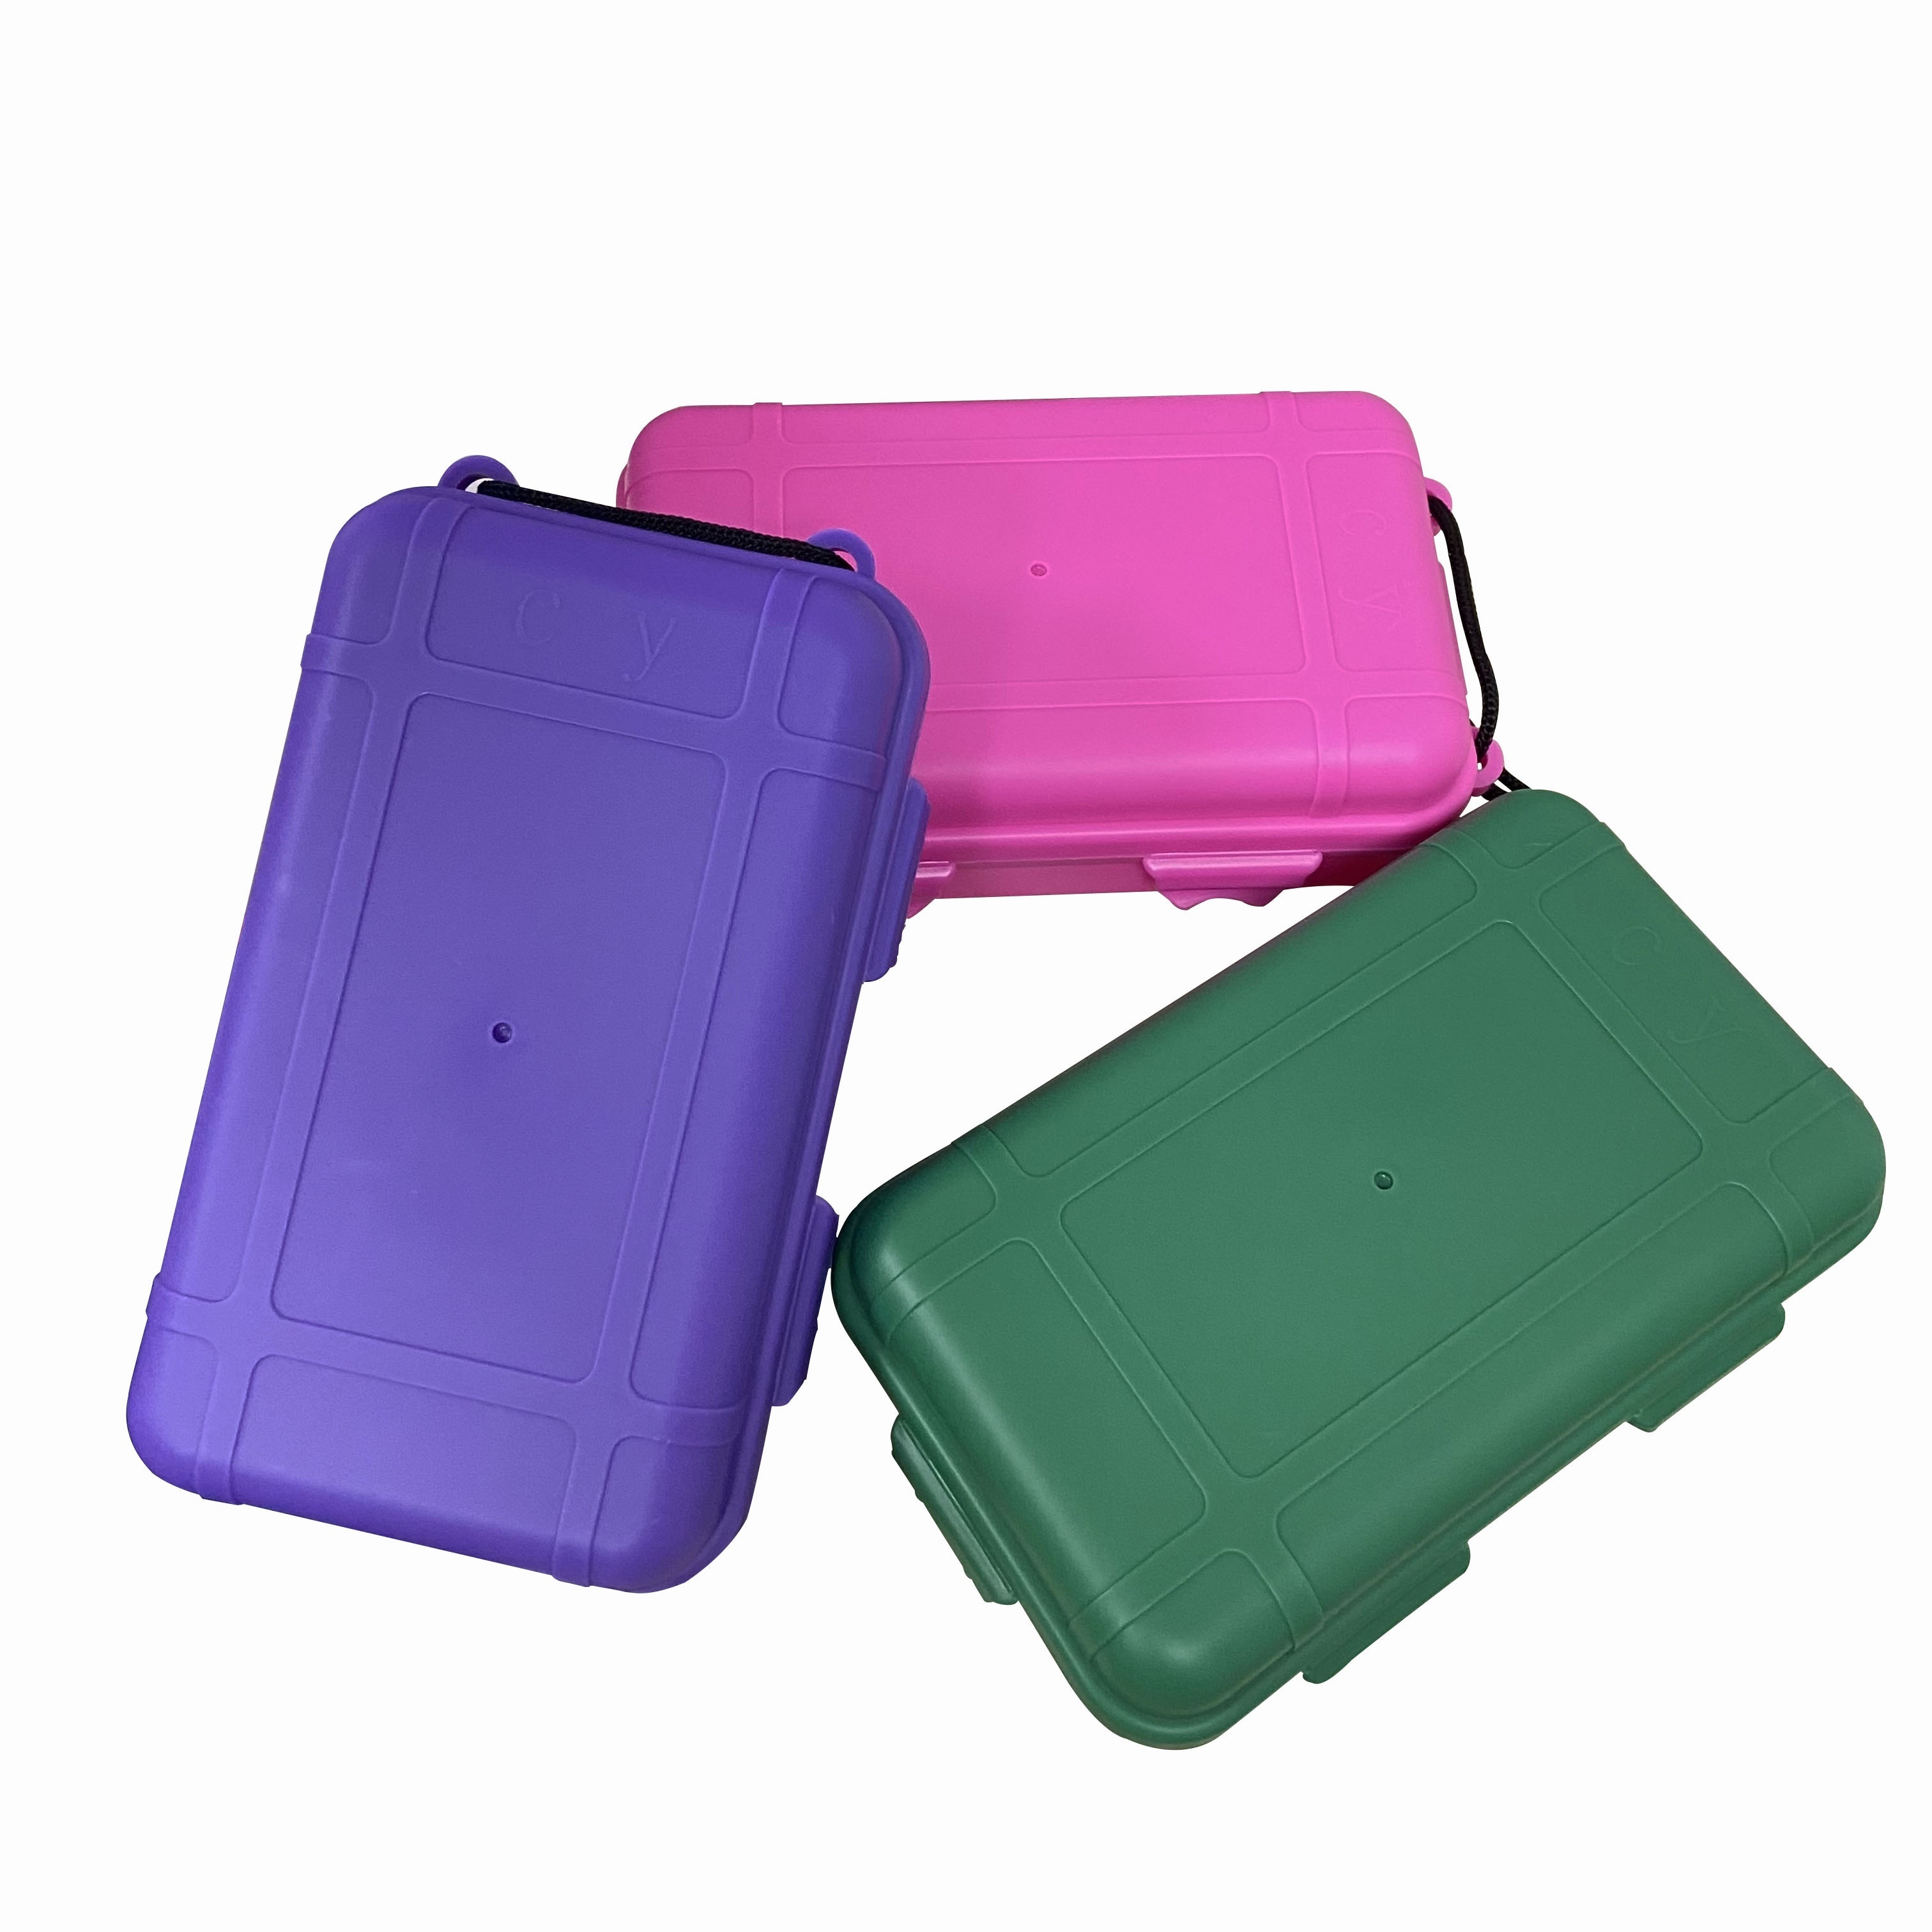 1pc Durable Waterproof Storage Box For Outdoor Adventures Perfect